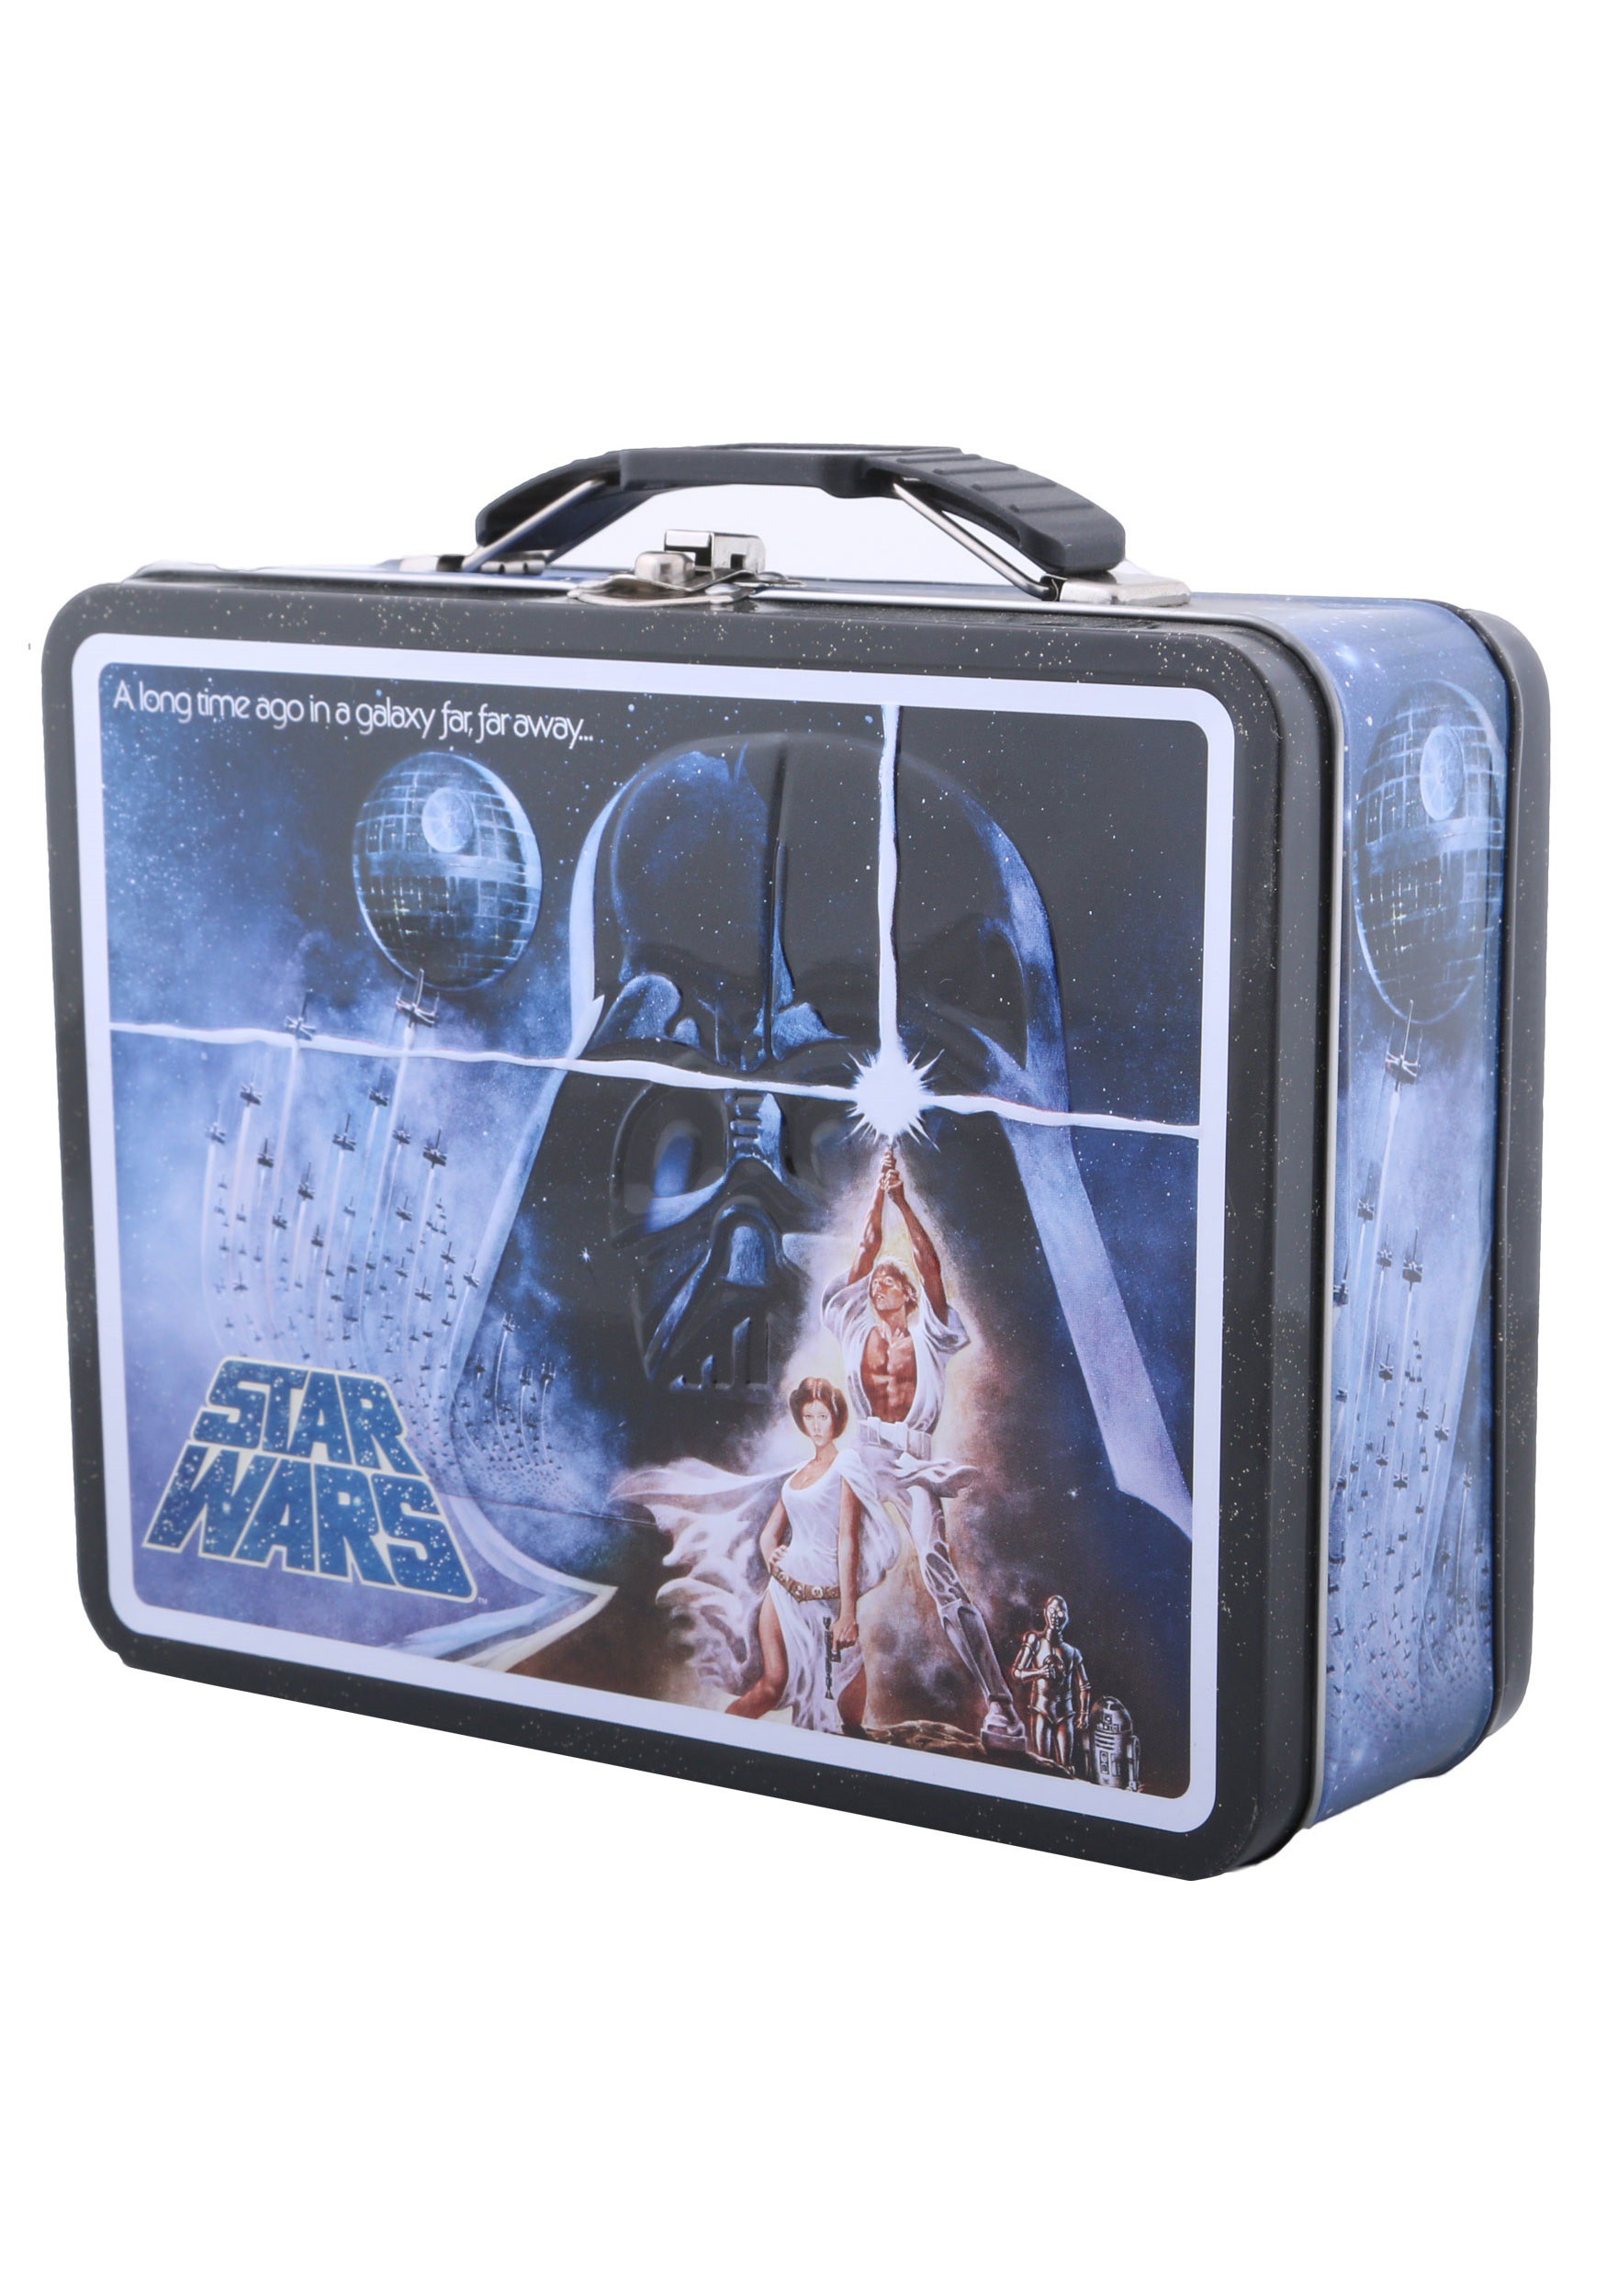 Star Wars A New Hope Movie Poster Art Large Tin Tote Lunchbox NEW UNUSED 